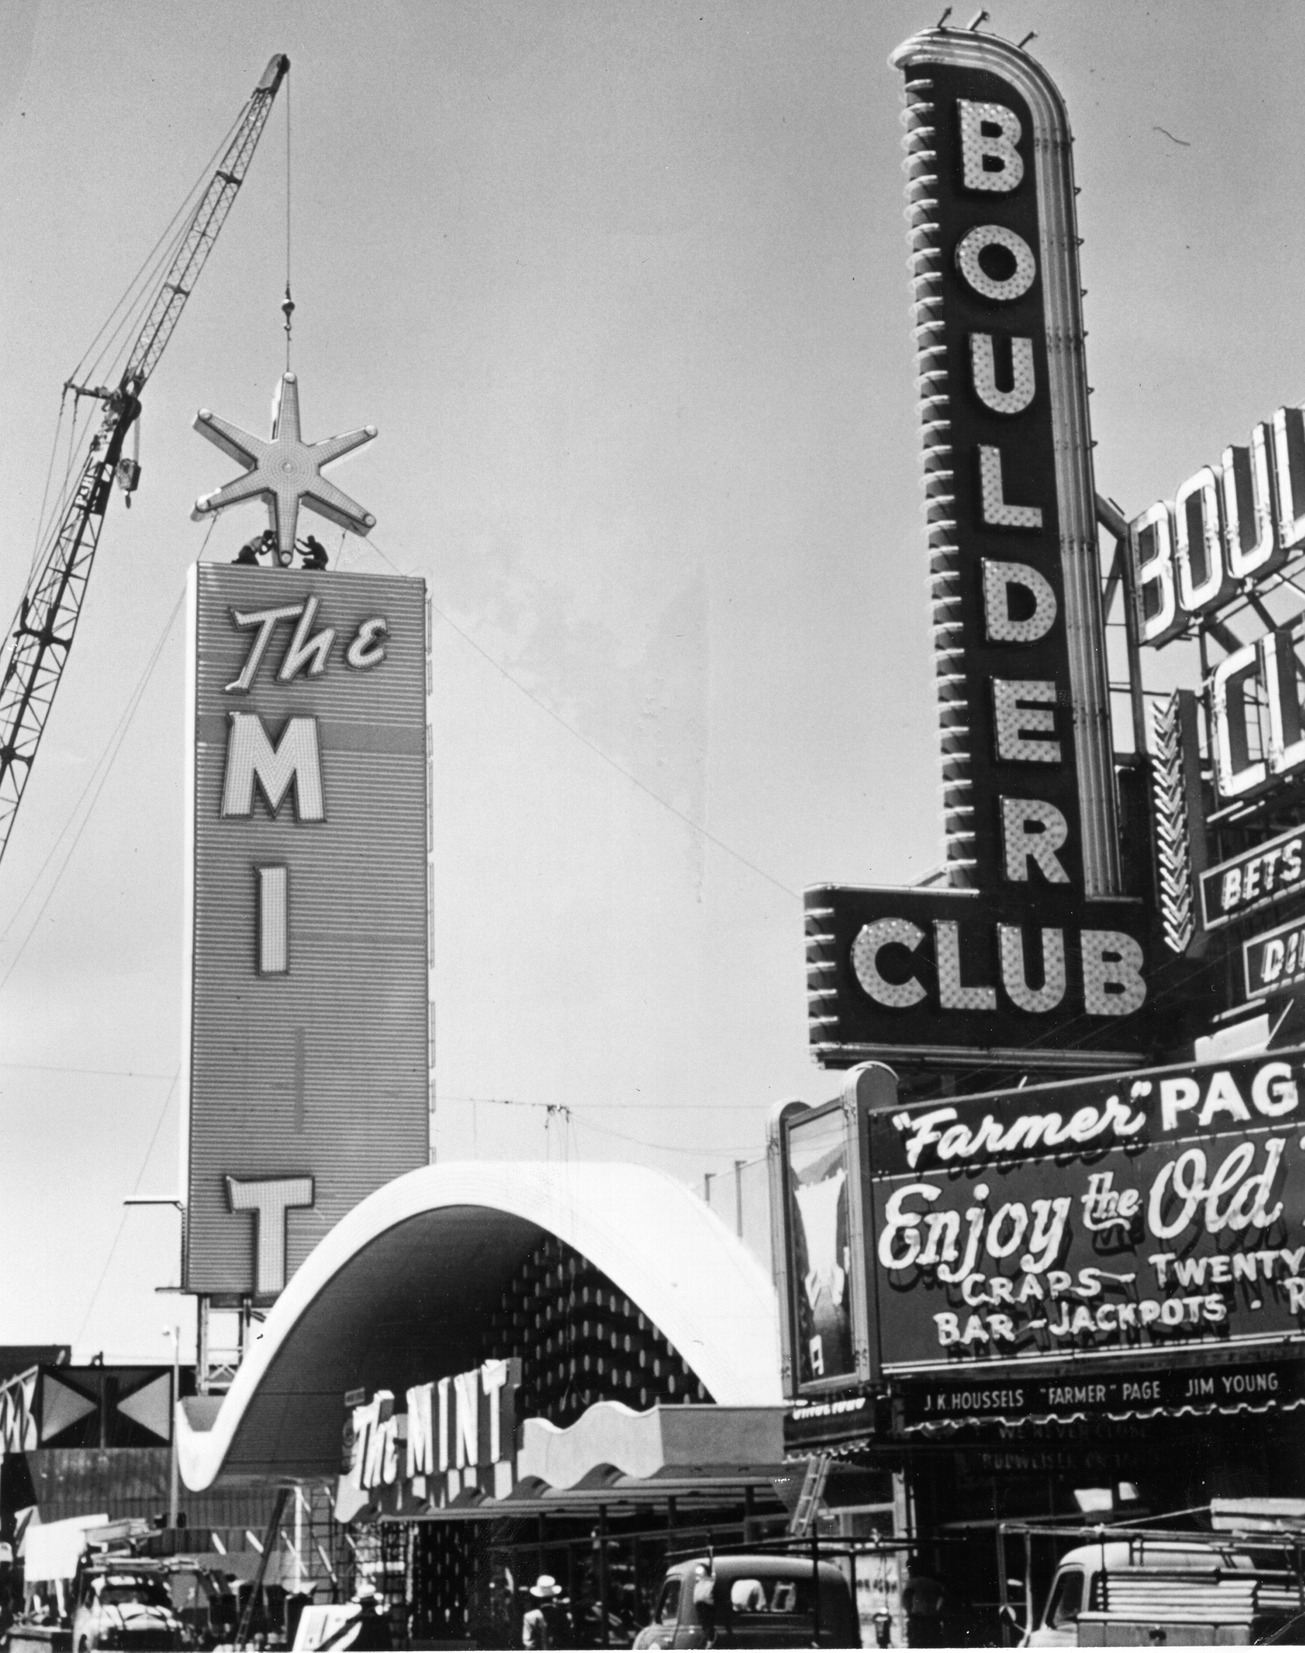 Photograph of assembly of the neon sign of the Mint (Las Vegas), 1957